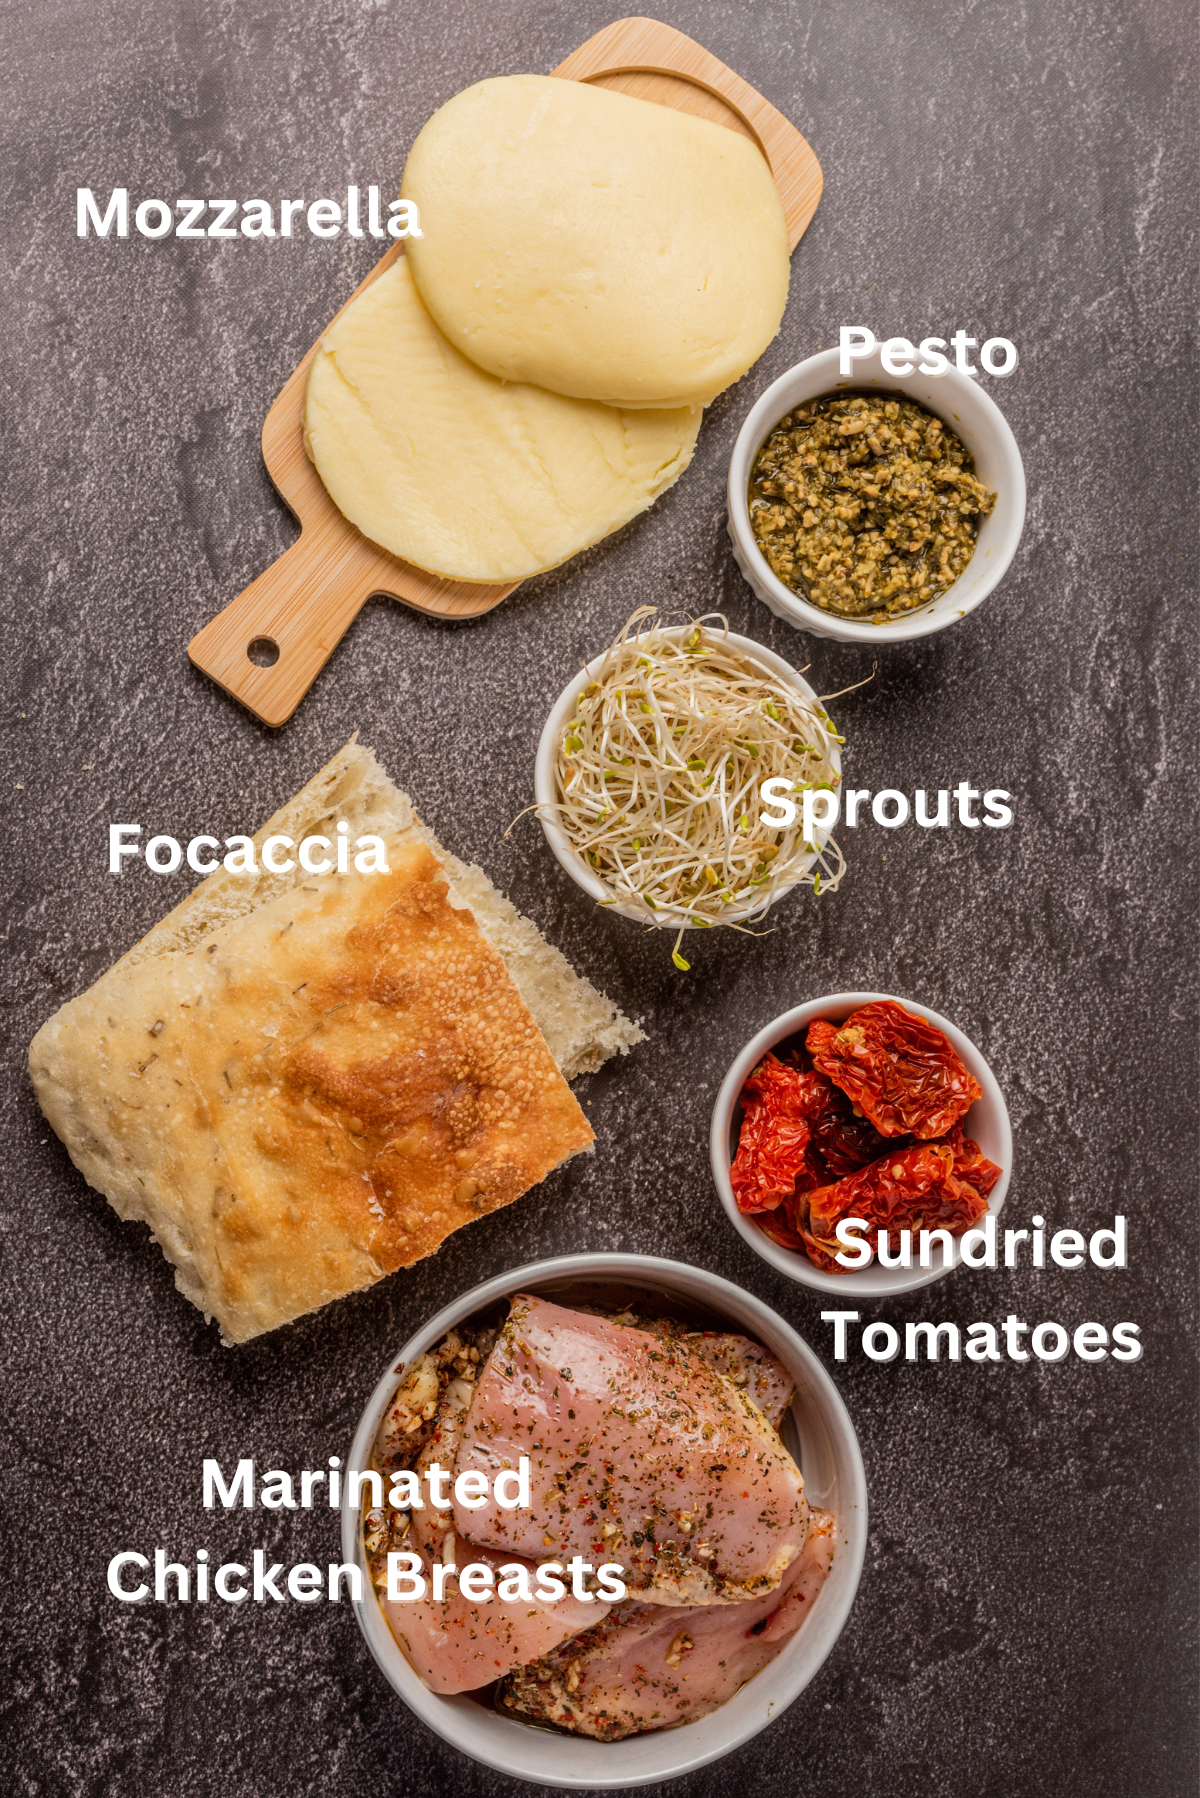 Sandwich ingredients. Top left on a small wood board mozzarella slices, to the right in small white bowls starting at top right pesto, alfalfa sprouts, sundried tomatoes, to the left of that focaccia slices and bottom is the marinated chicken breasts.